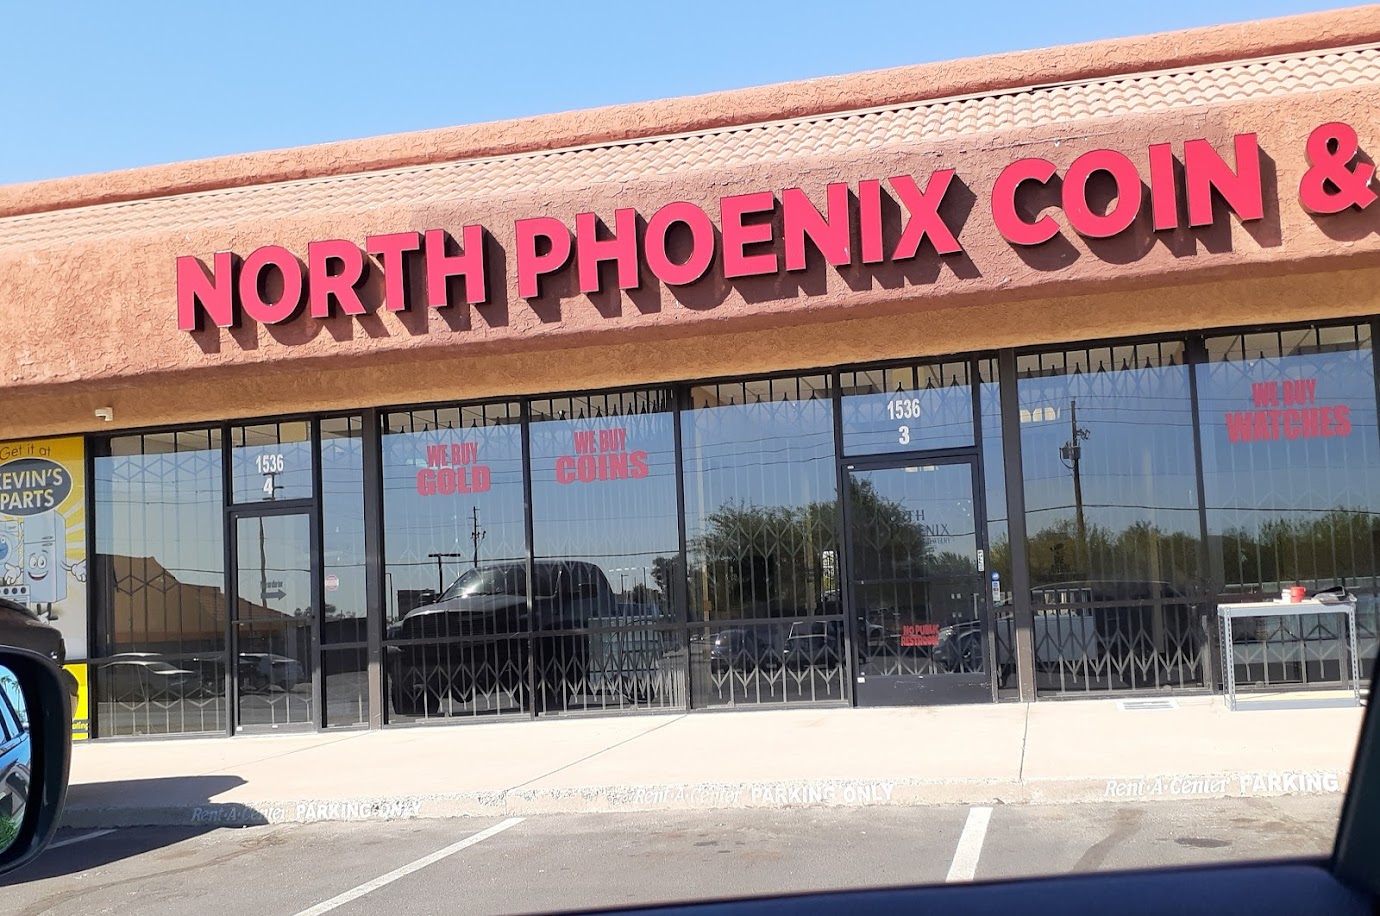 North Phoenix Coin and Jewelry